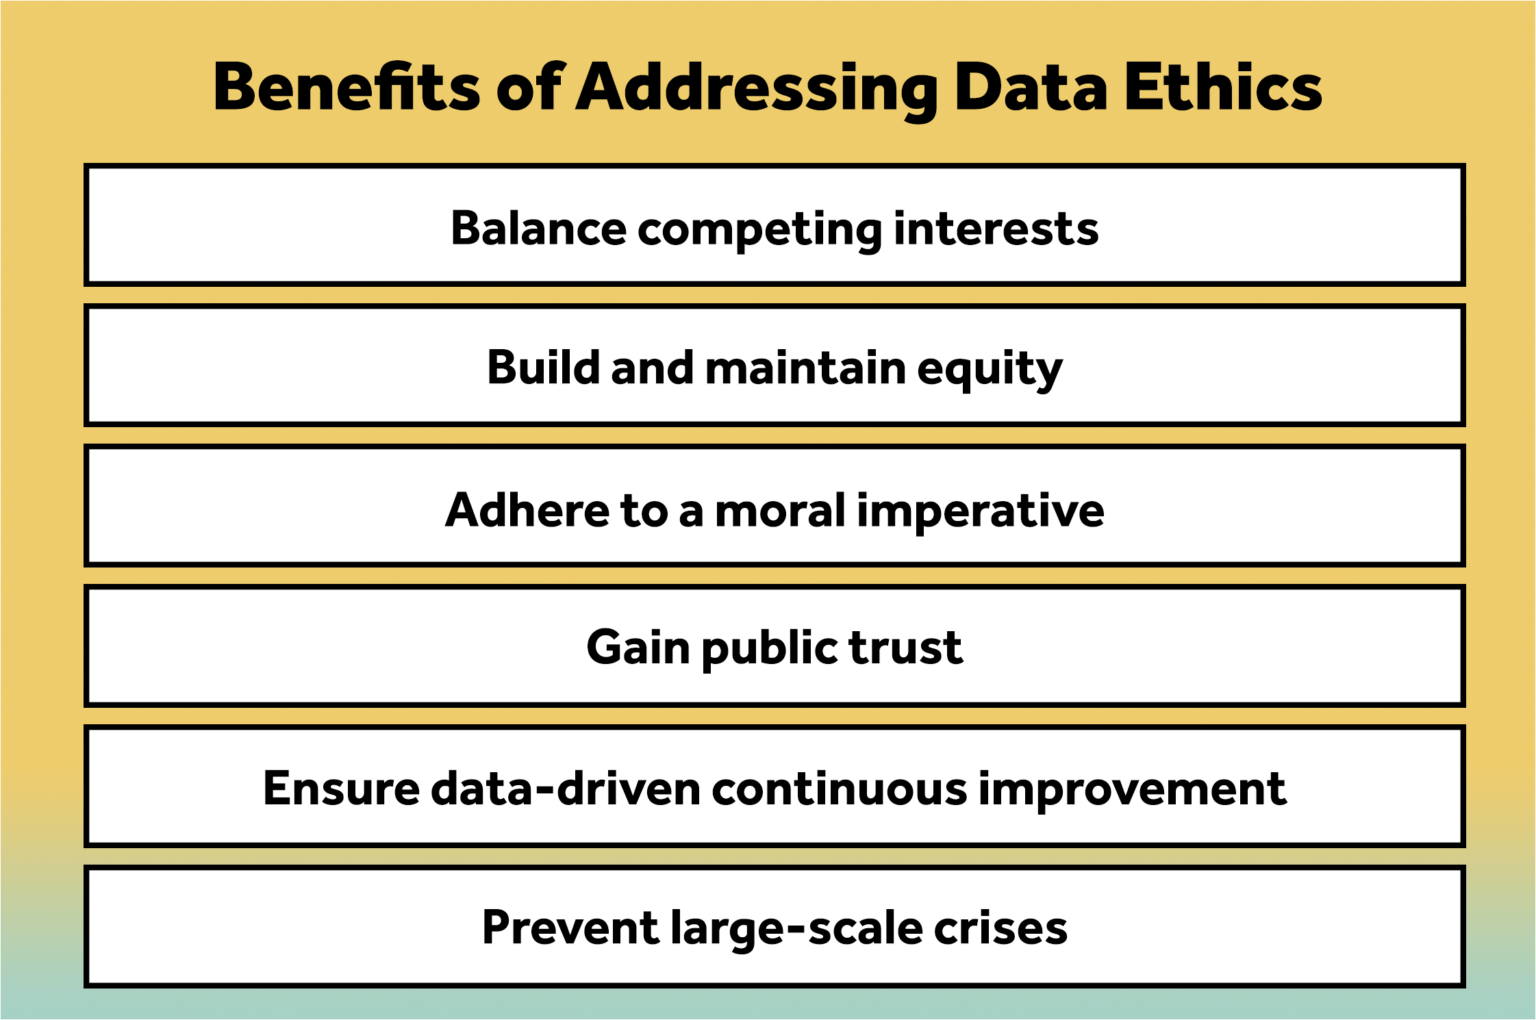 Report Data Ethics in Education and the Social Sector: What Does It